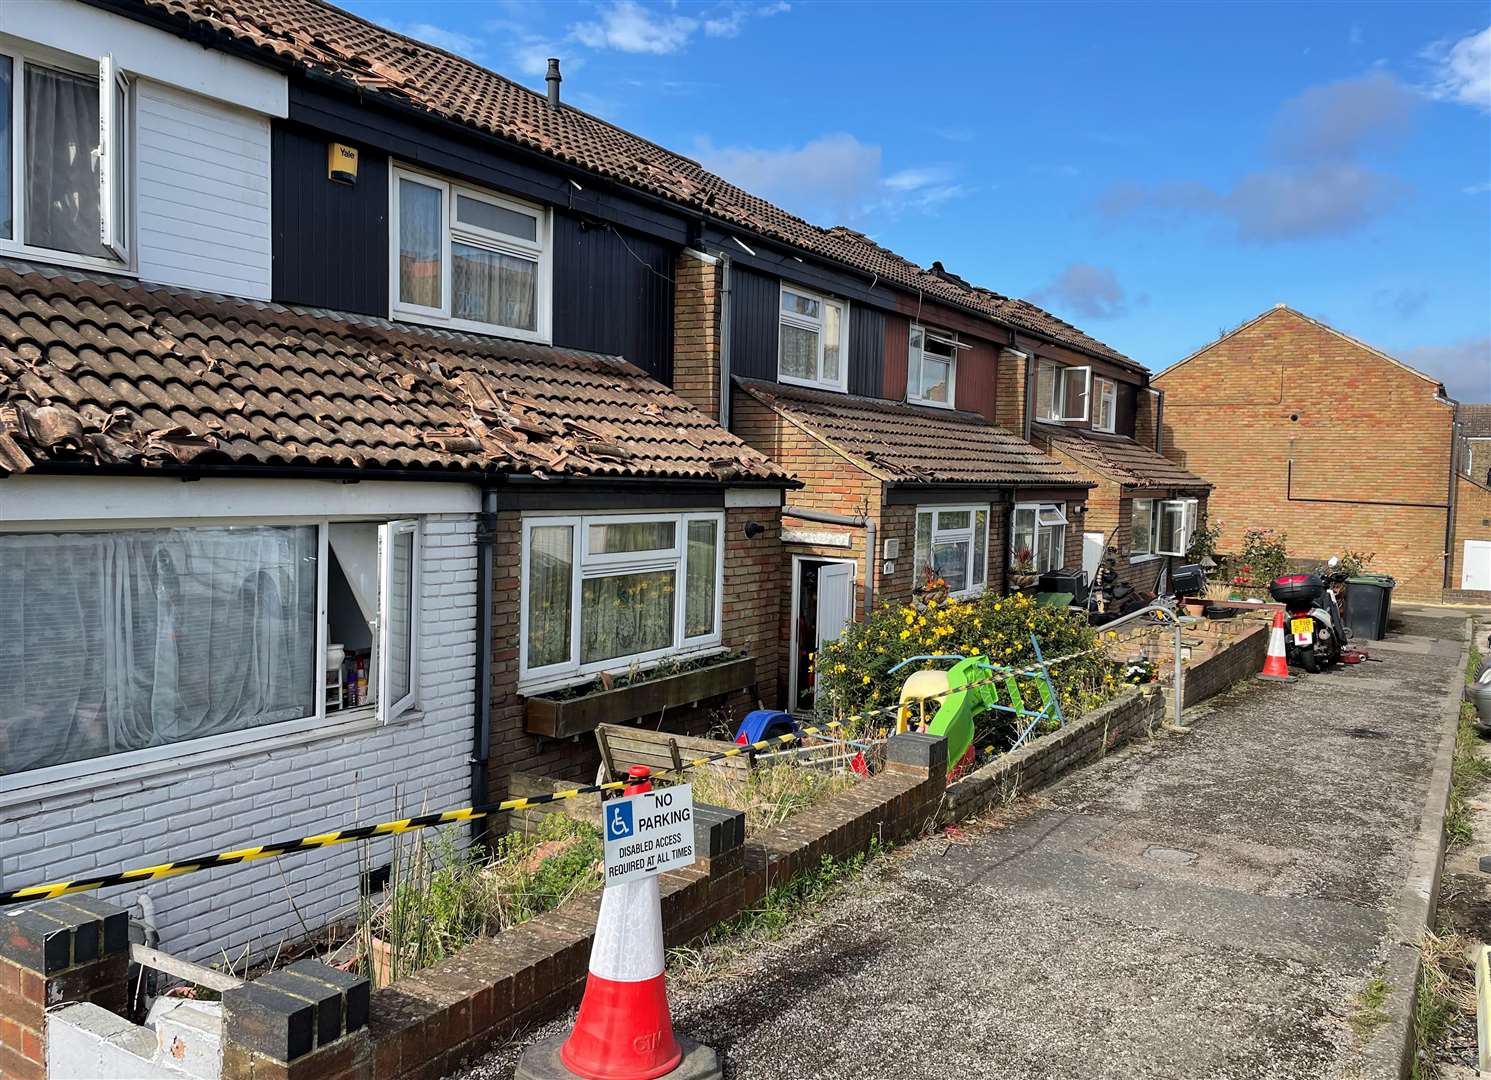 The homes have since been cordoned off by emergency services. Picture: Alex Langridge